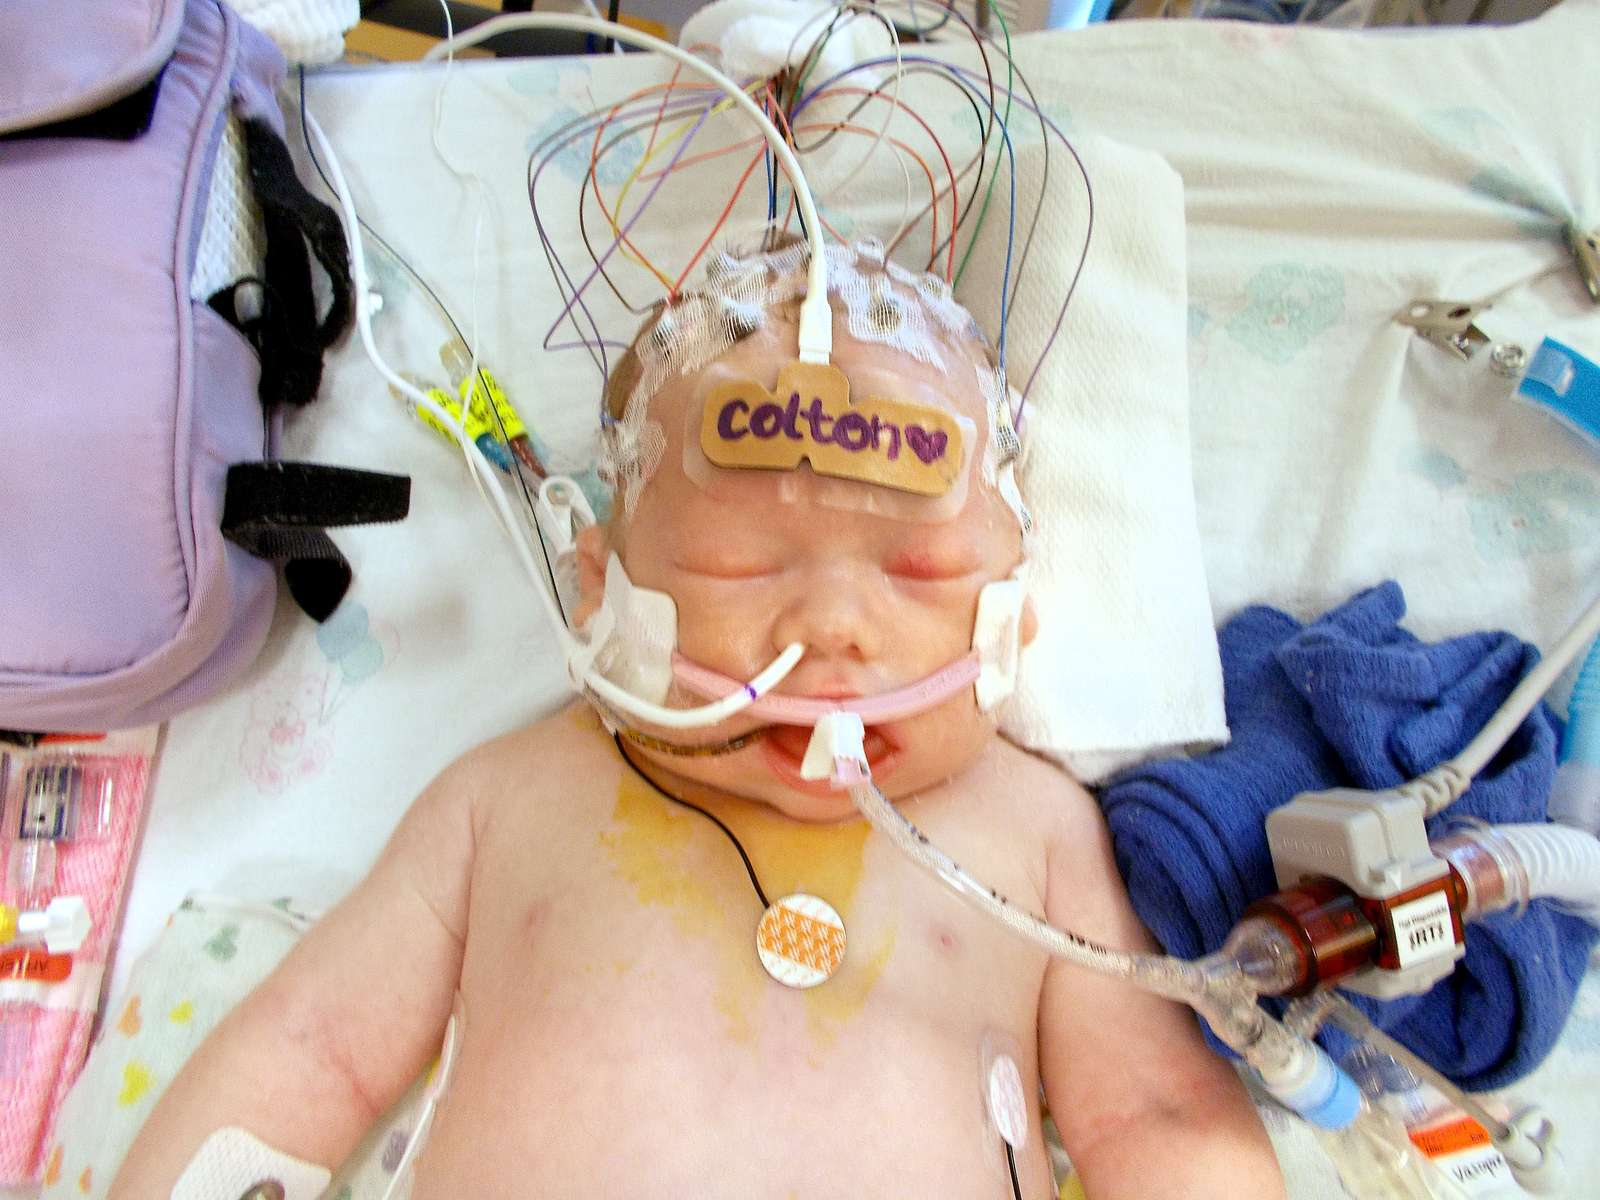 Colton Hidde arrived at Children’s Hospital of Wisconsin near death, with high ammonia levels in his blood. Doctors initially wrestled with whether he could be saved. it was a crisis that could have been avoided. 